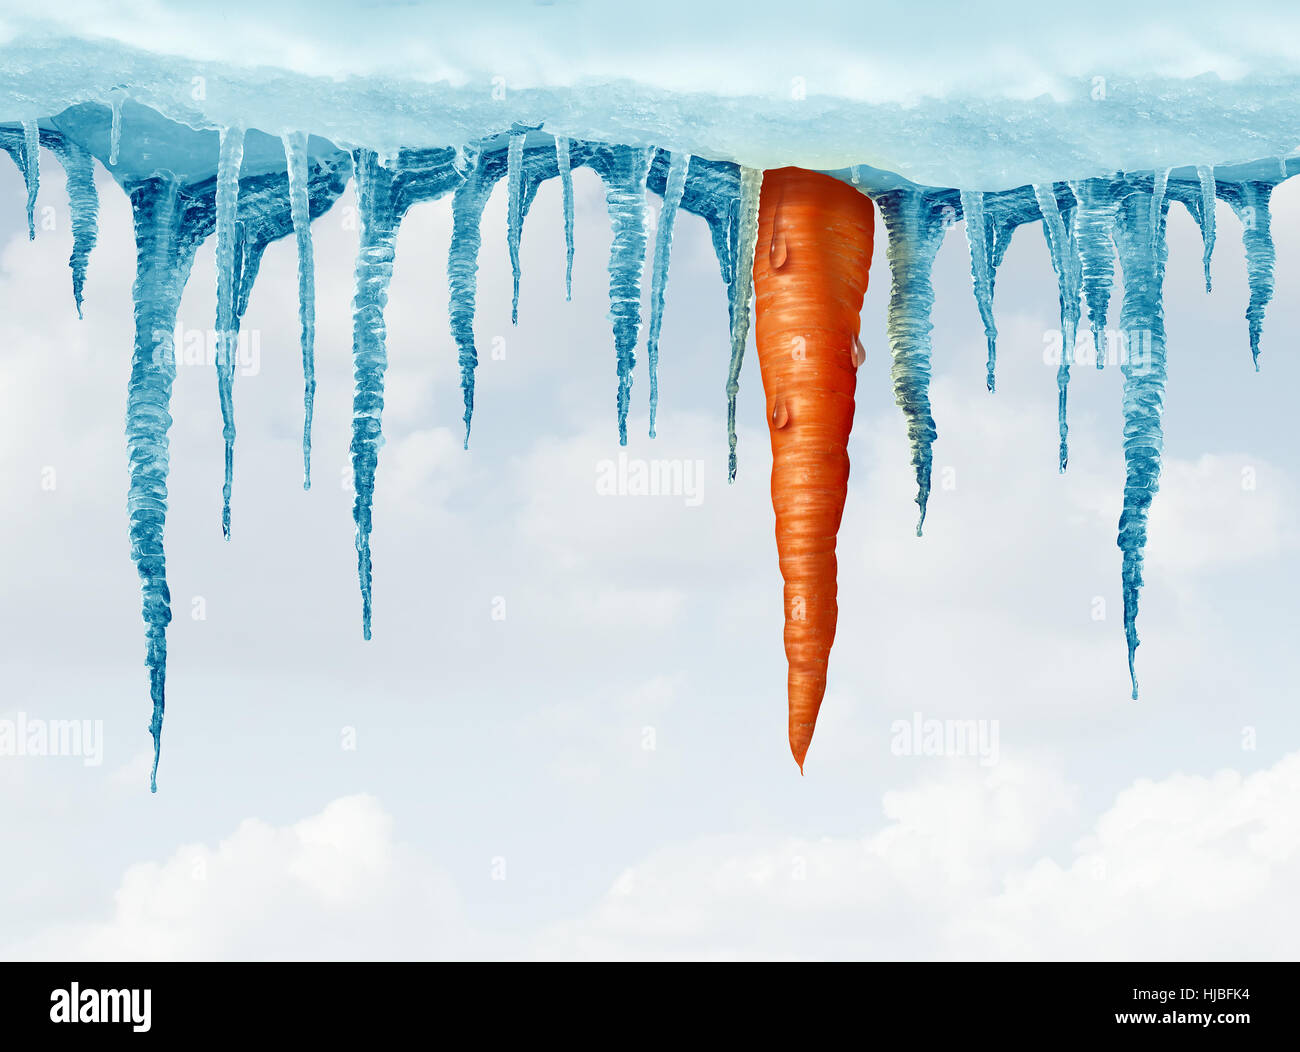 Winter diet concept and preserving and storing fresh crisp vegetables symbol as a carrot hanging from a group of frozen icicles as a food freshness id Stock Photo